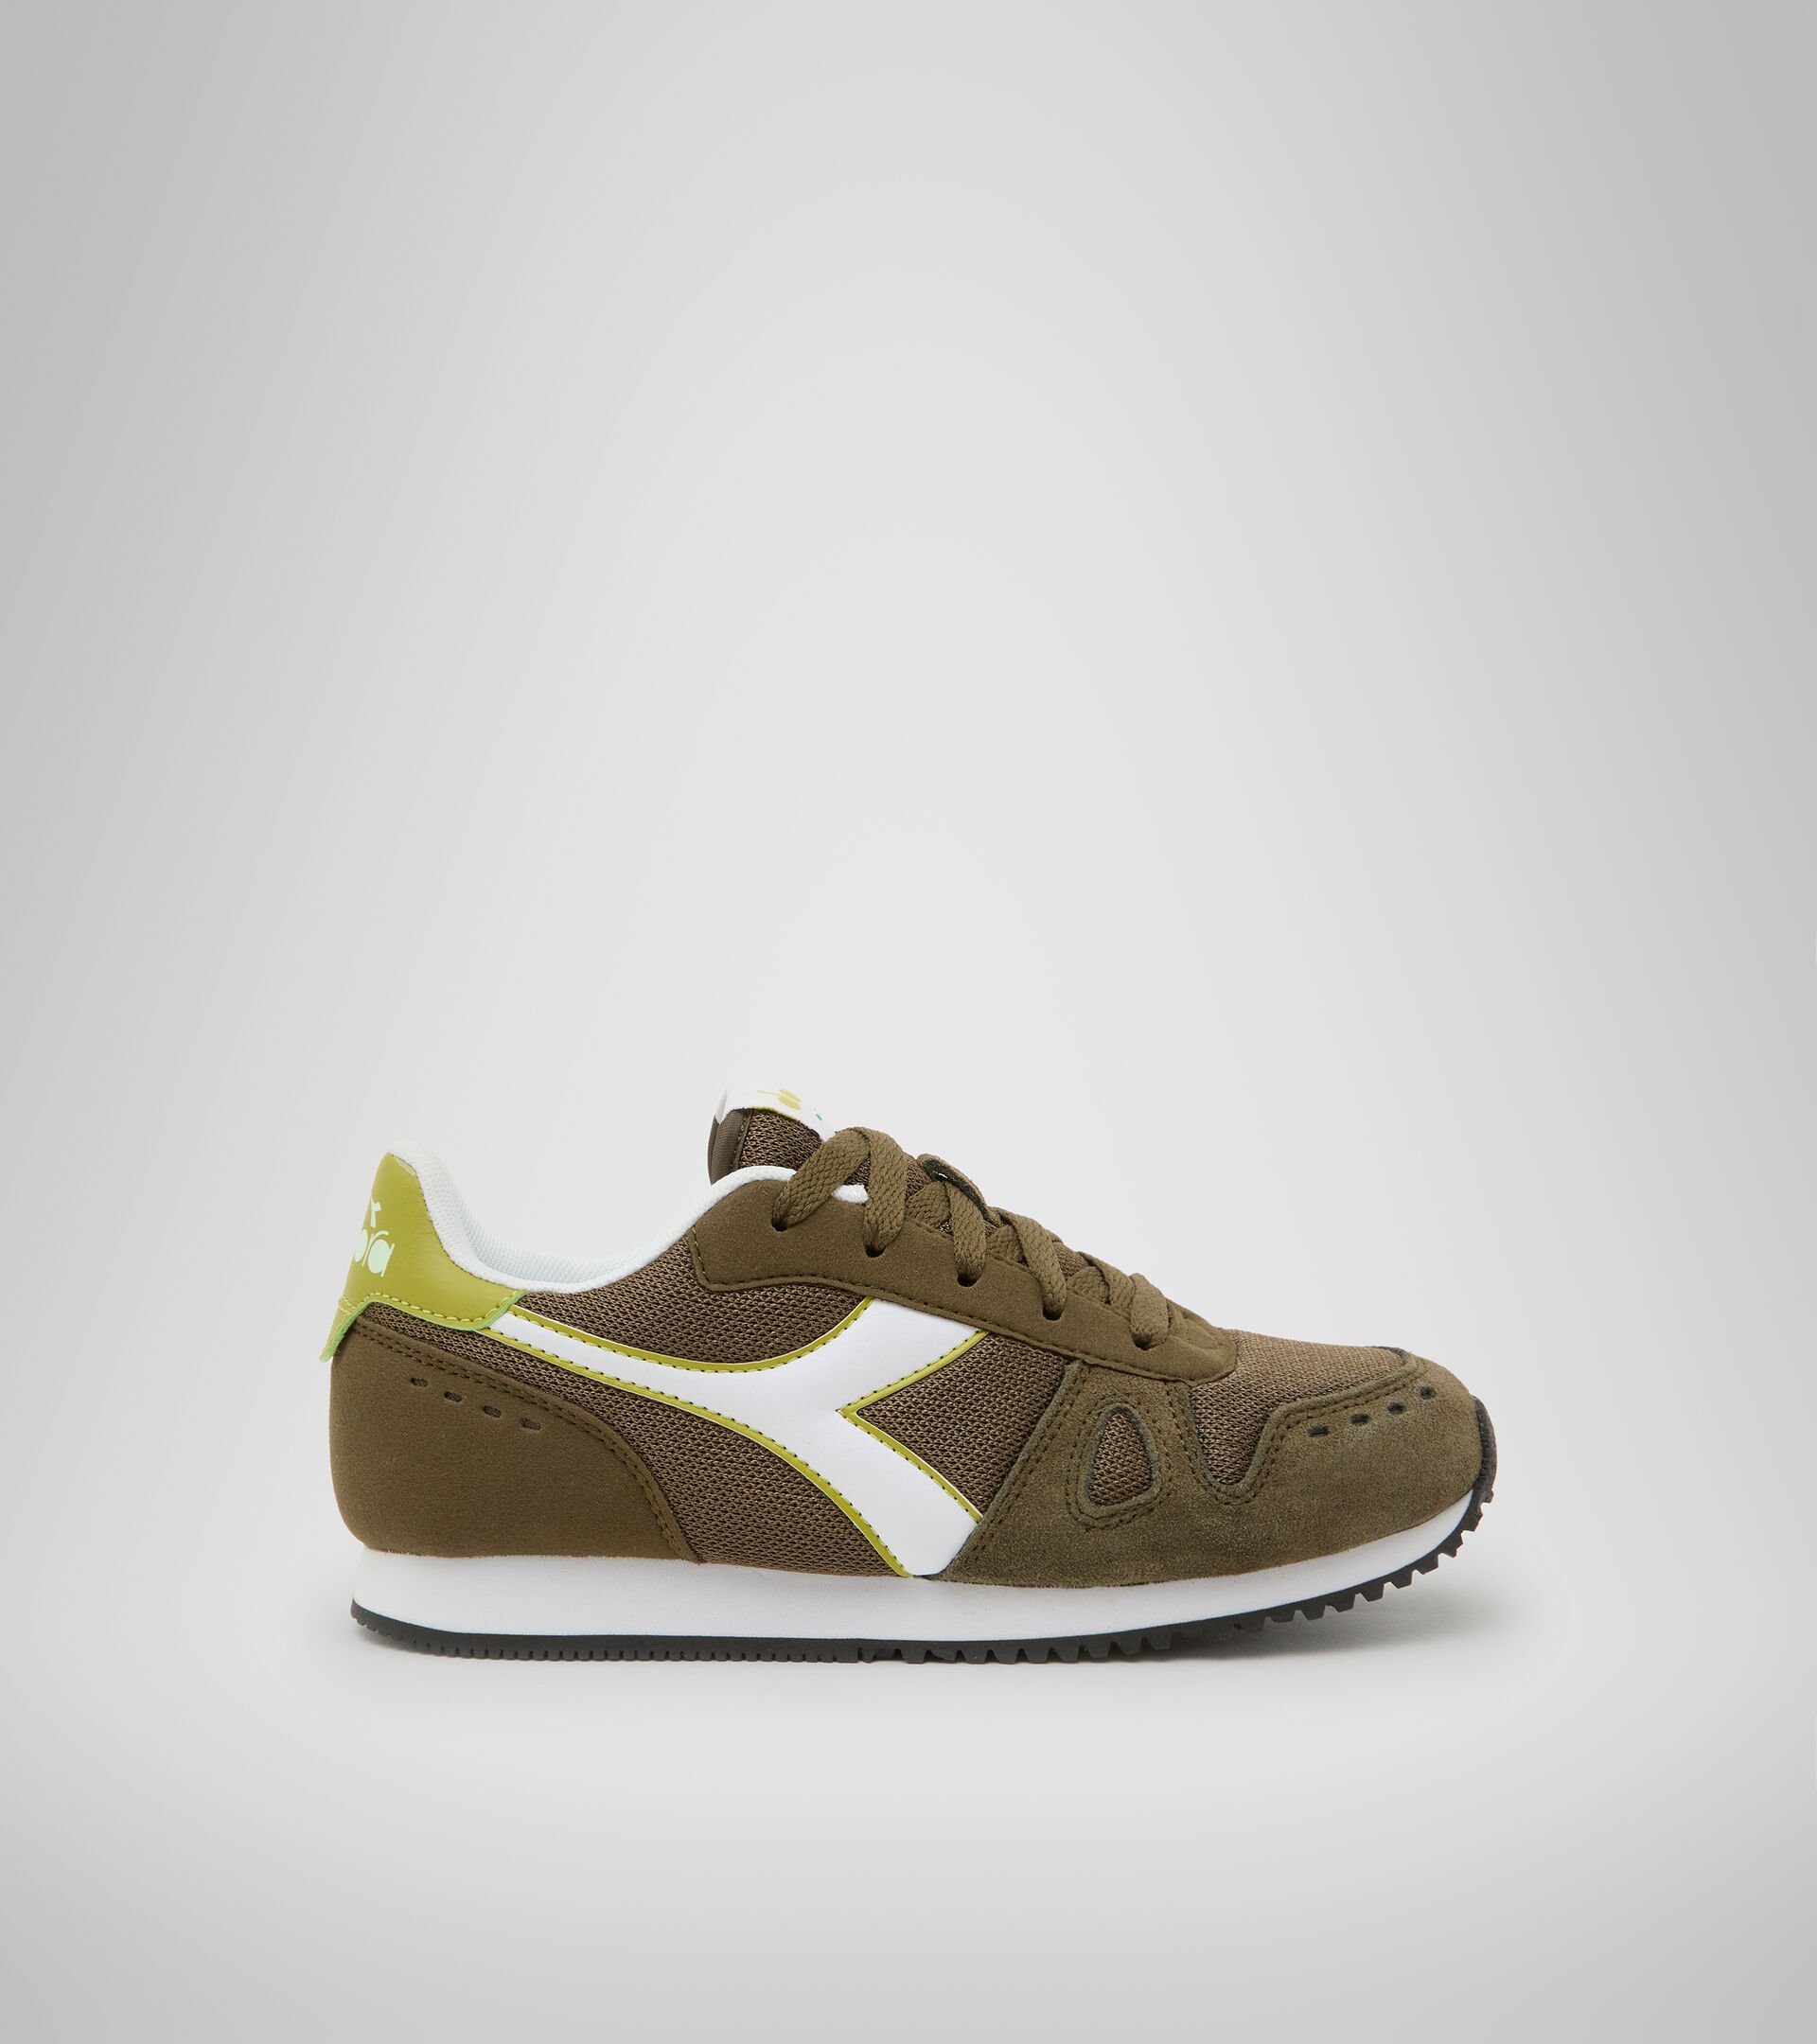 Sports shoes - Youth 8-16 years SIMPLE RUN GS OLIVE GREEN - Diadora